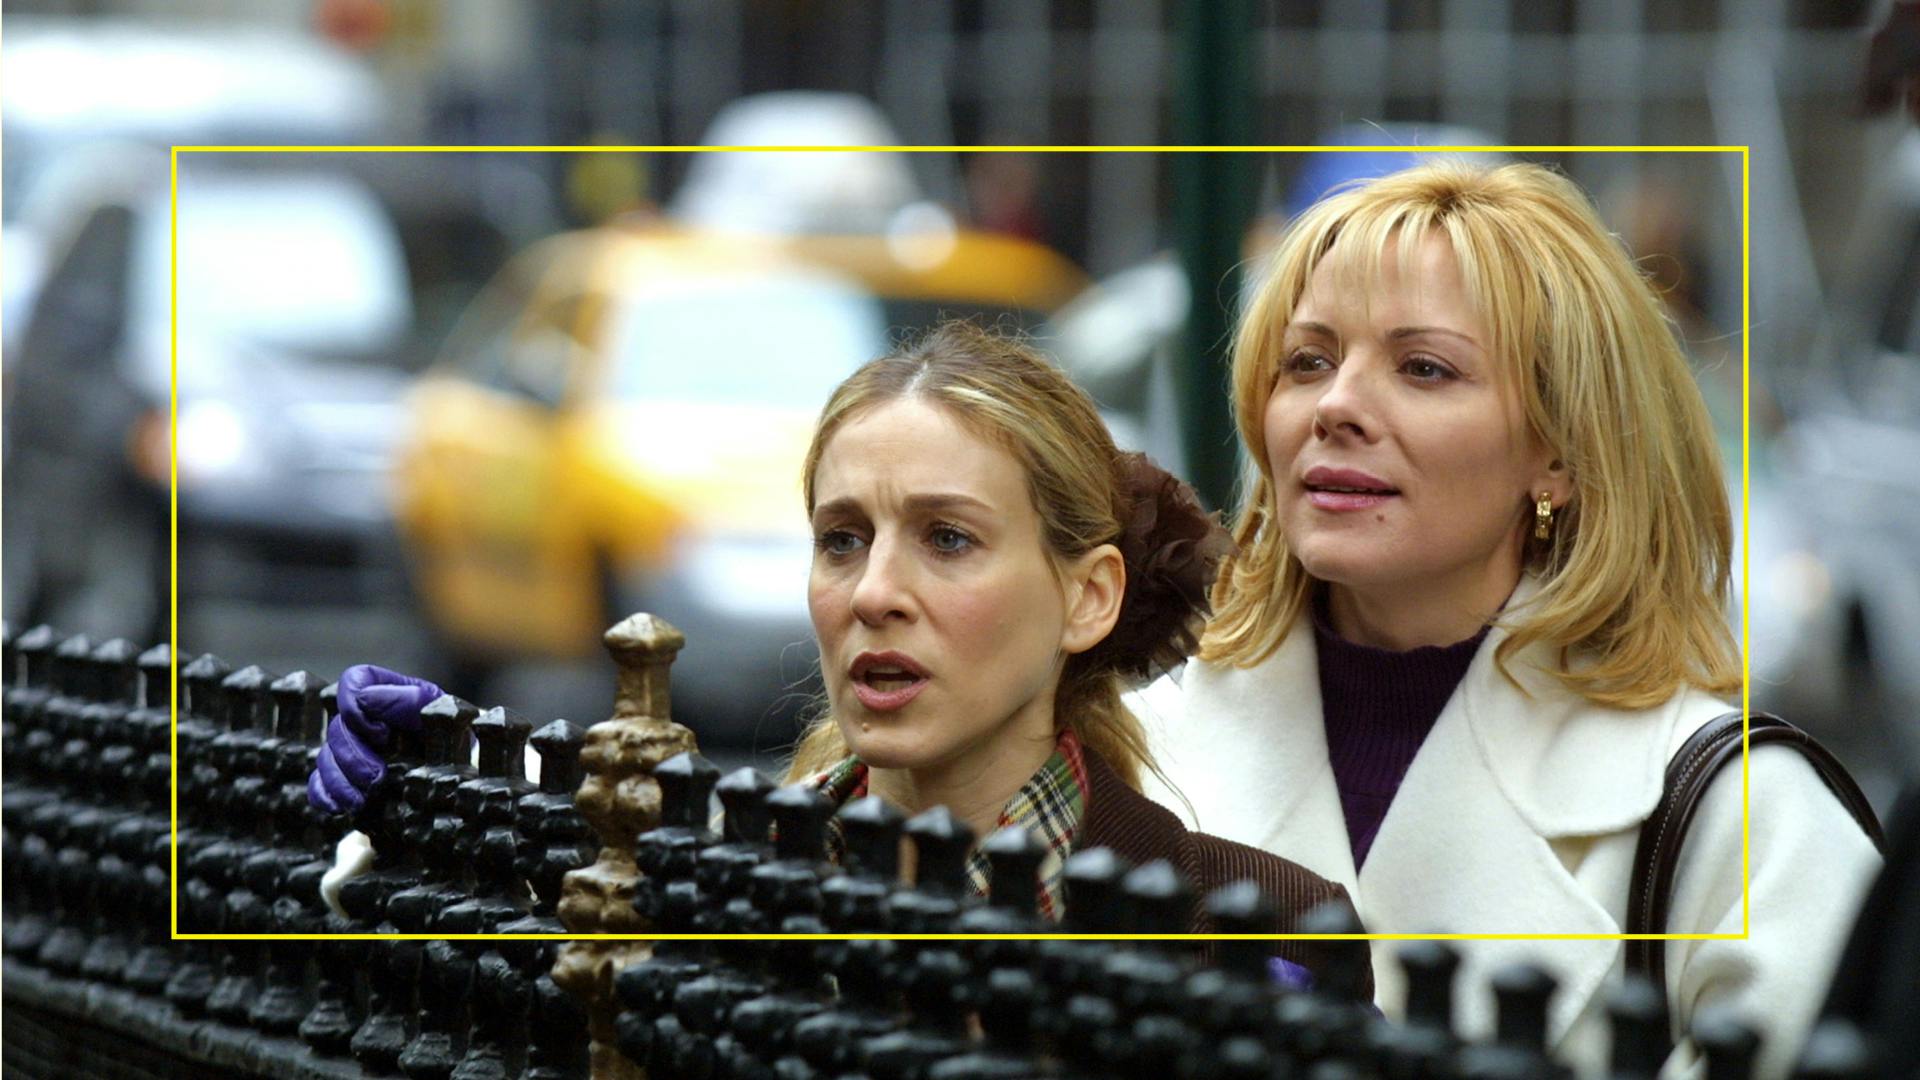 Heres The Story Behind Kim Cattrall And Sarah Jessica Parkers Feud Celebrity Grazia pic